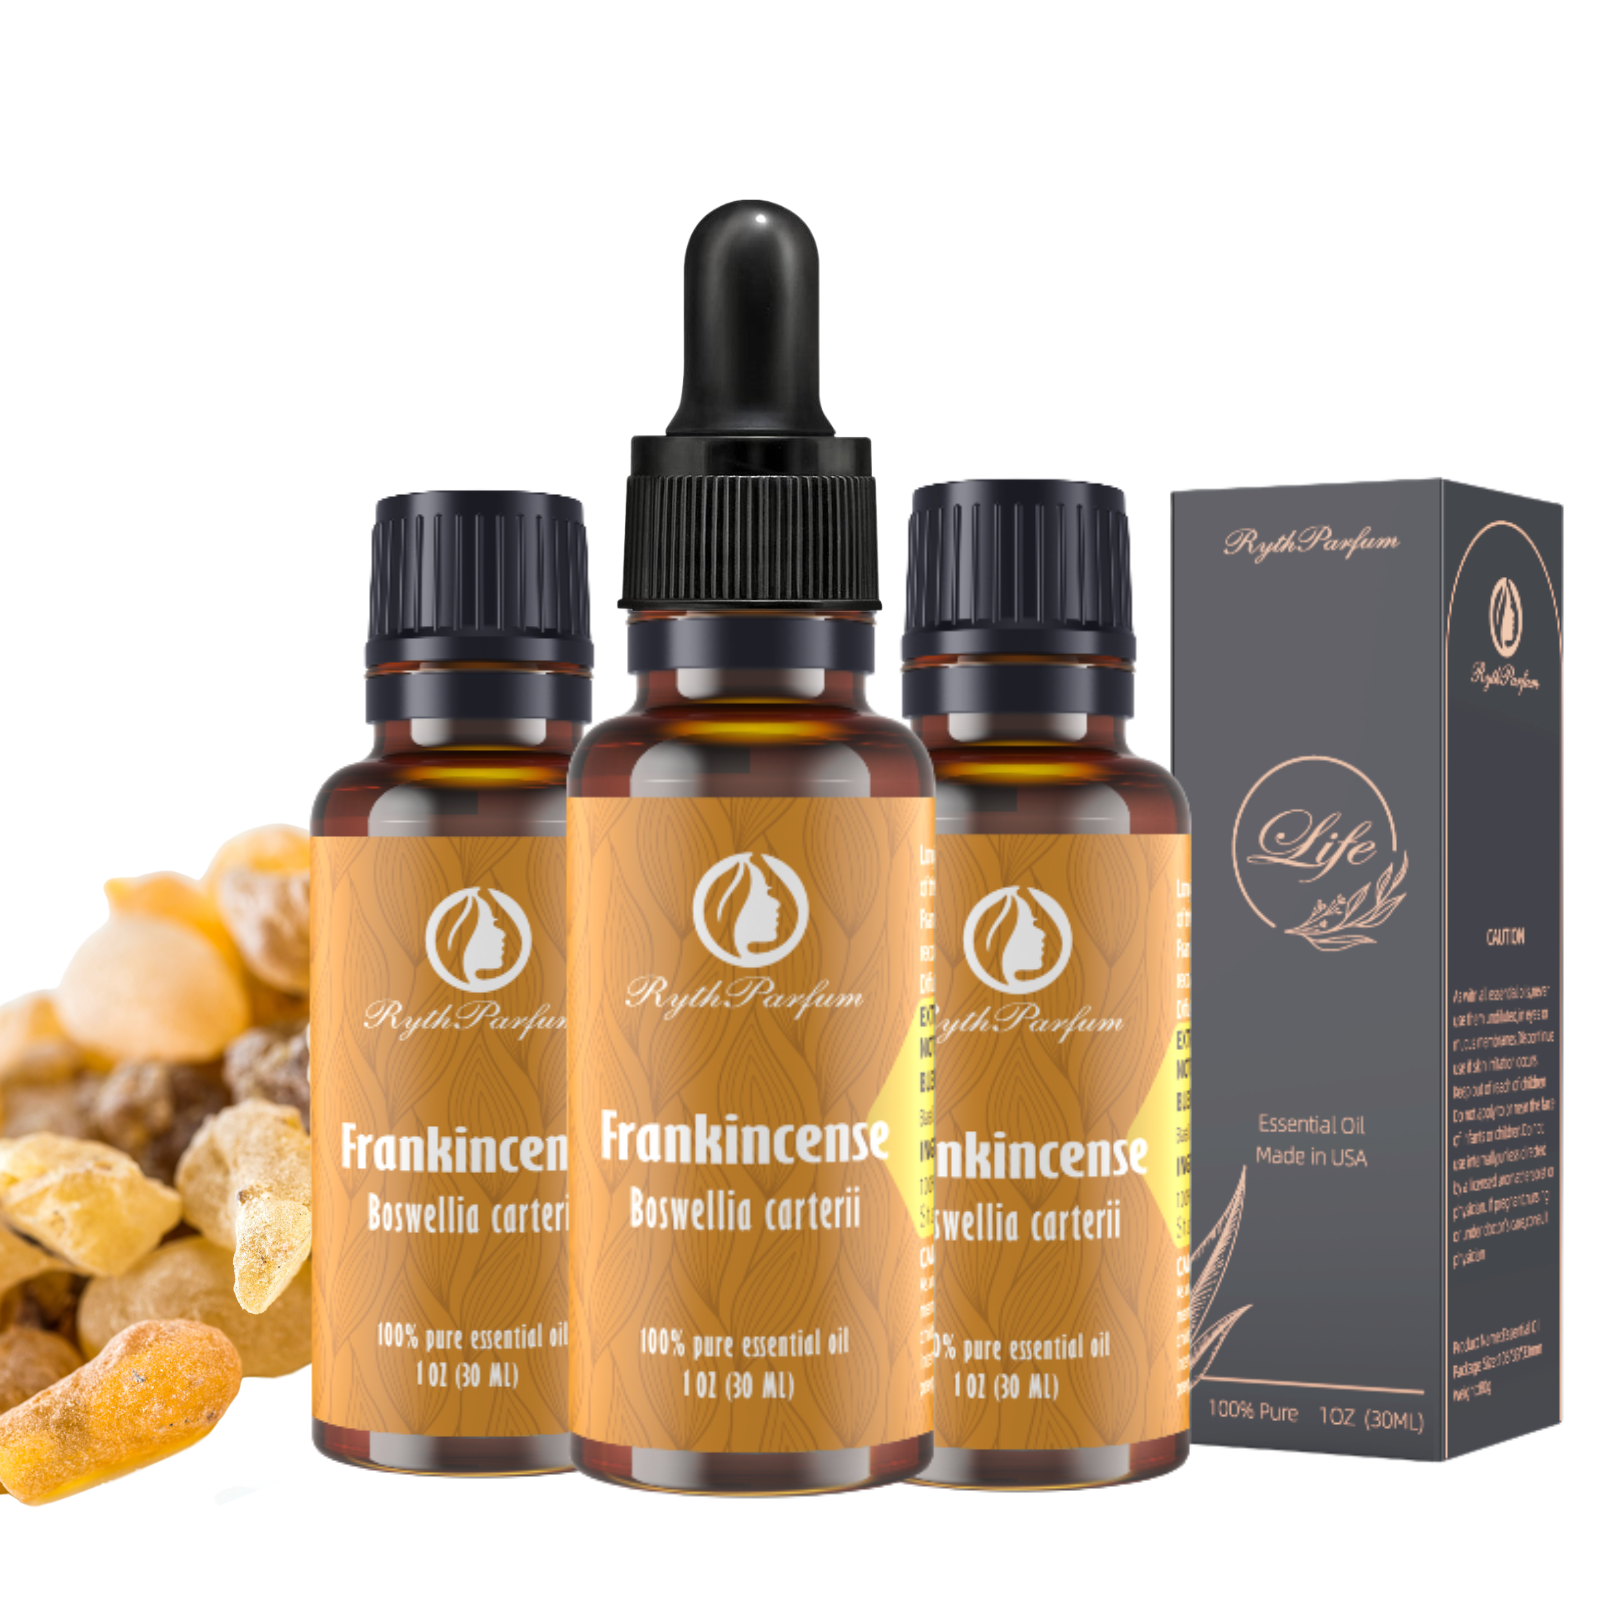 RythParfum Frankincense Oil (3PACK of 1oz) with 3 DROPPER